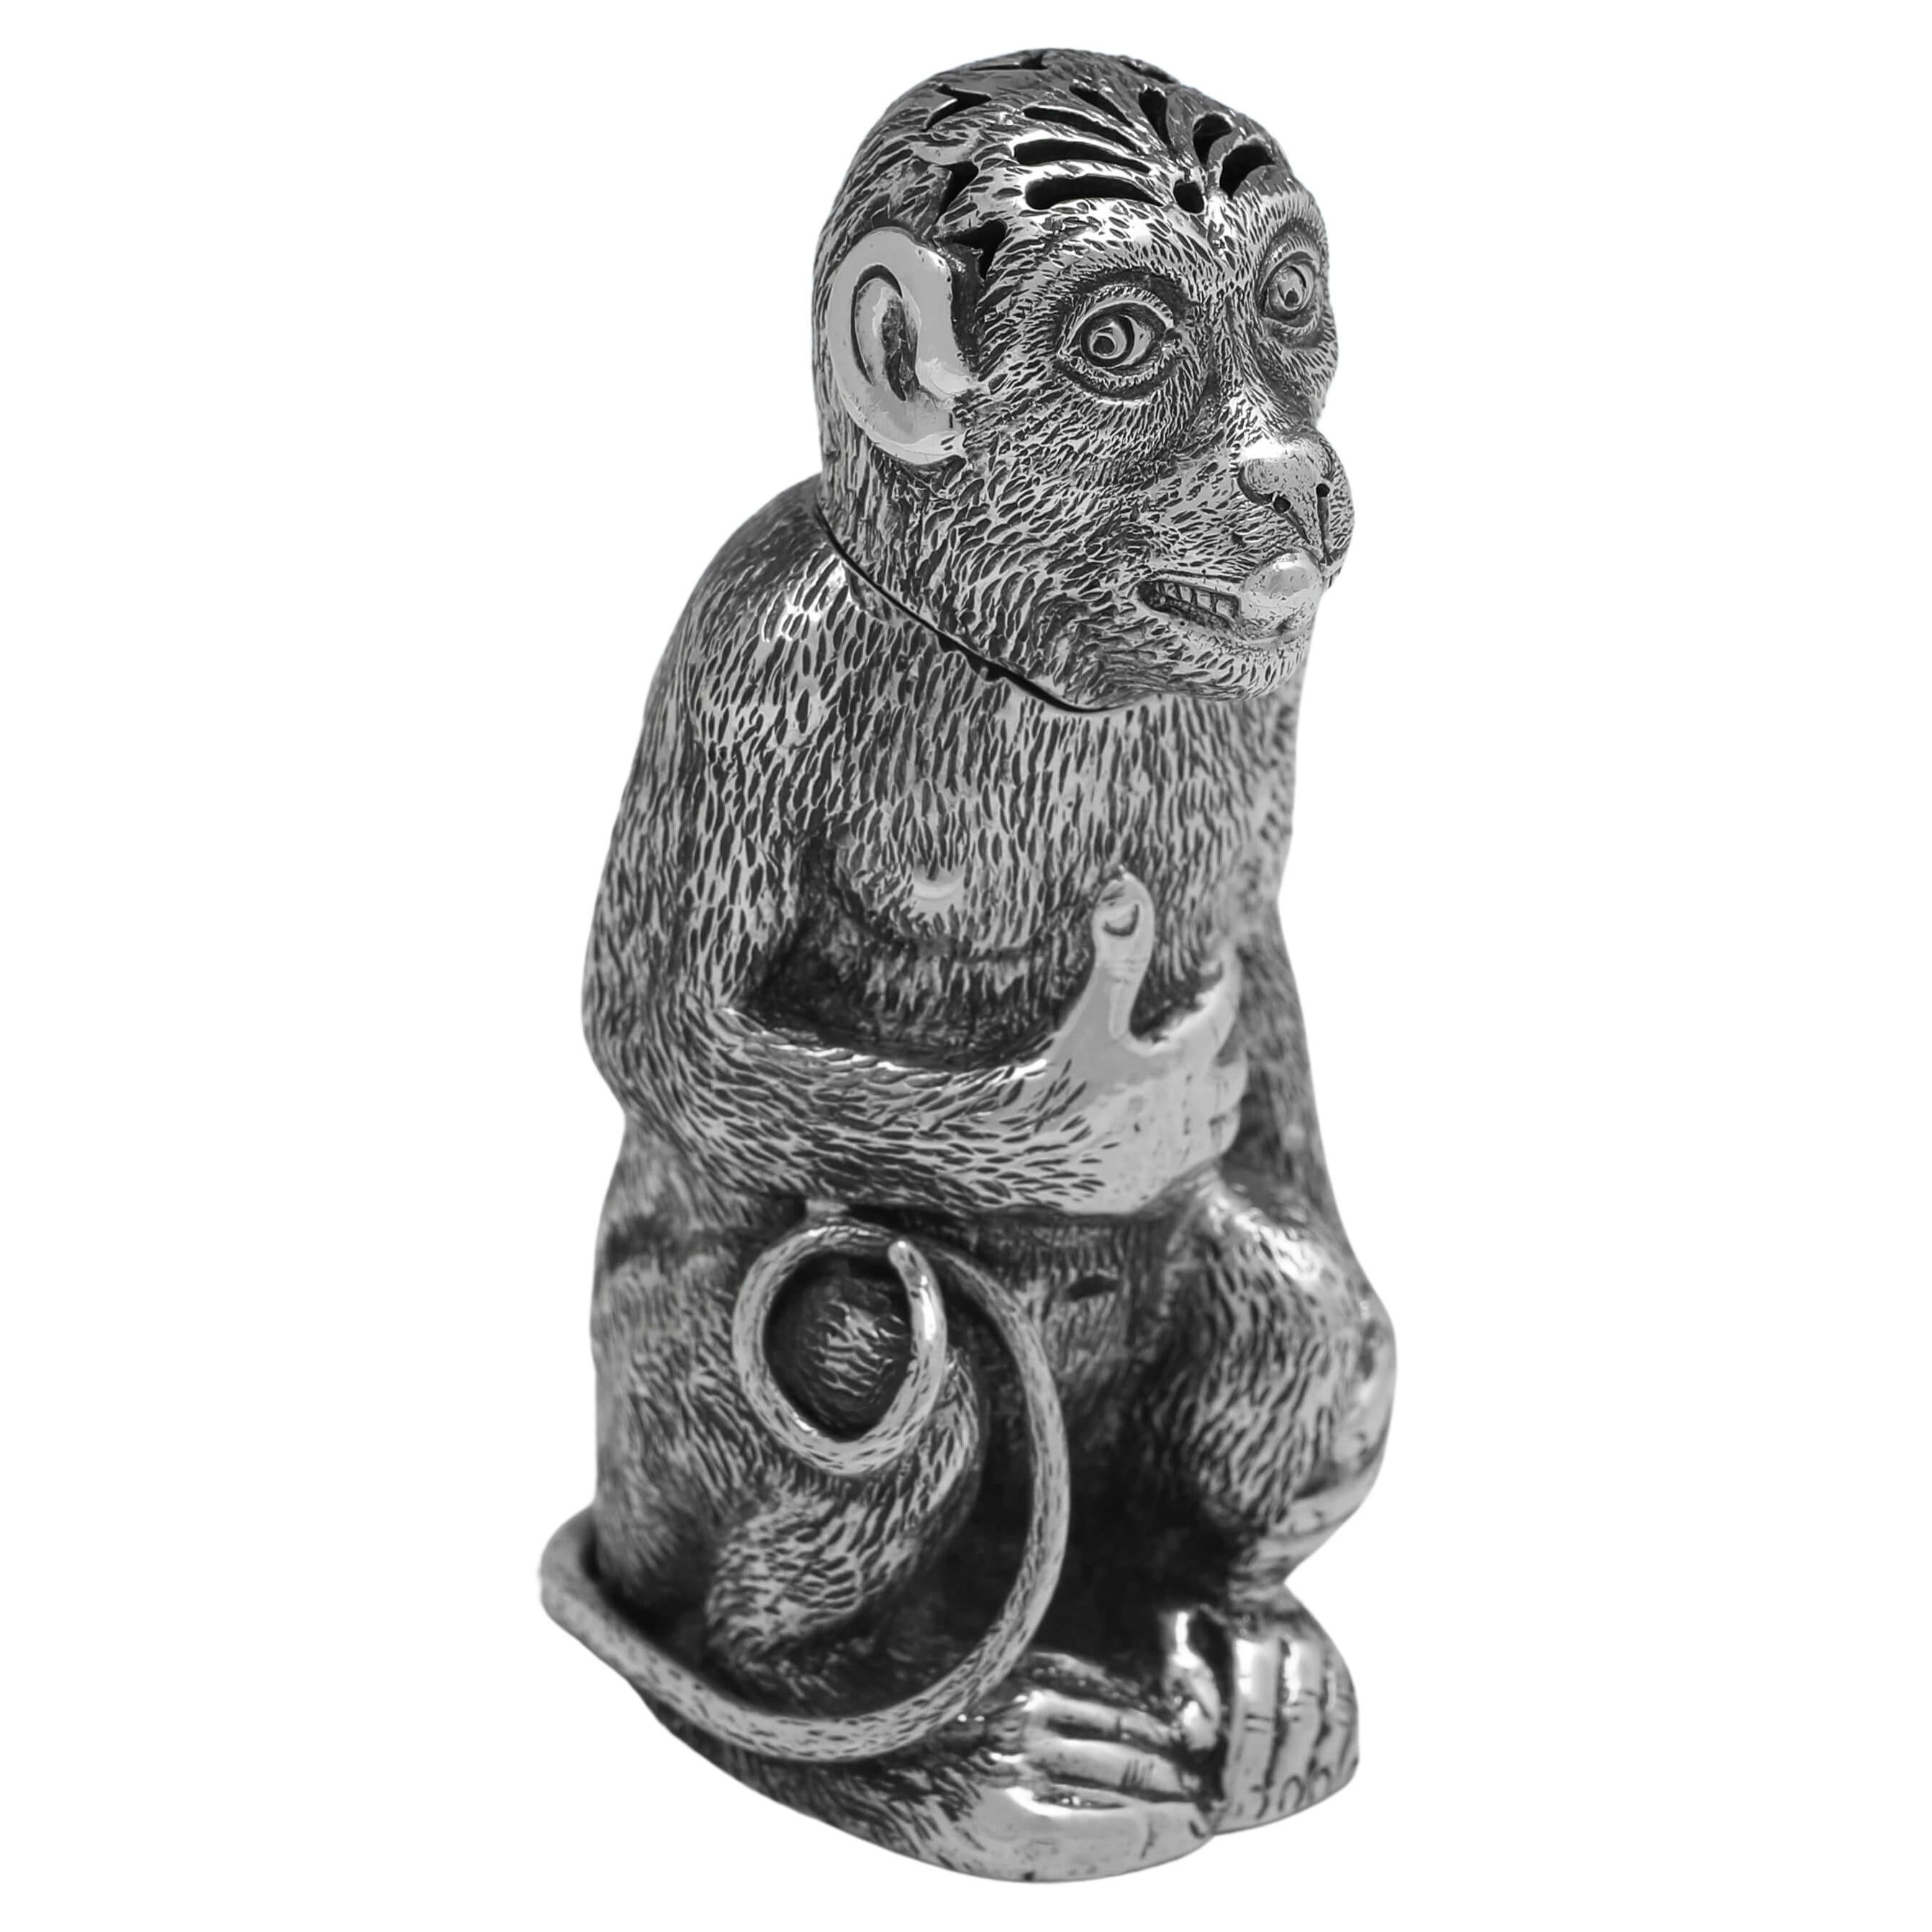 Very Rare English Antique Sterling Silver Monkey Pepper Pot - London 1881 For Sale